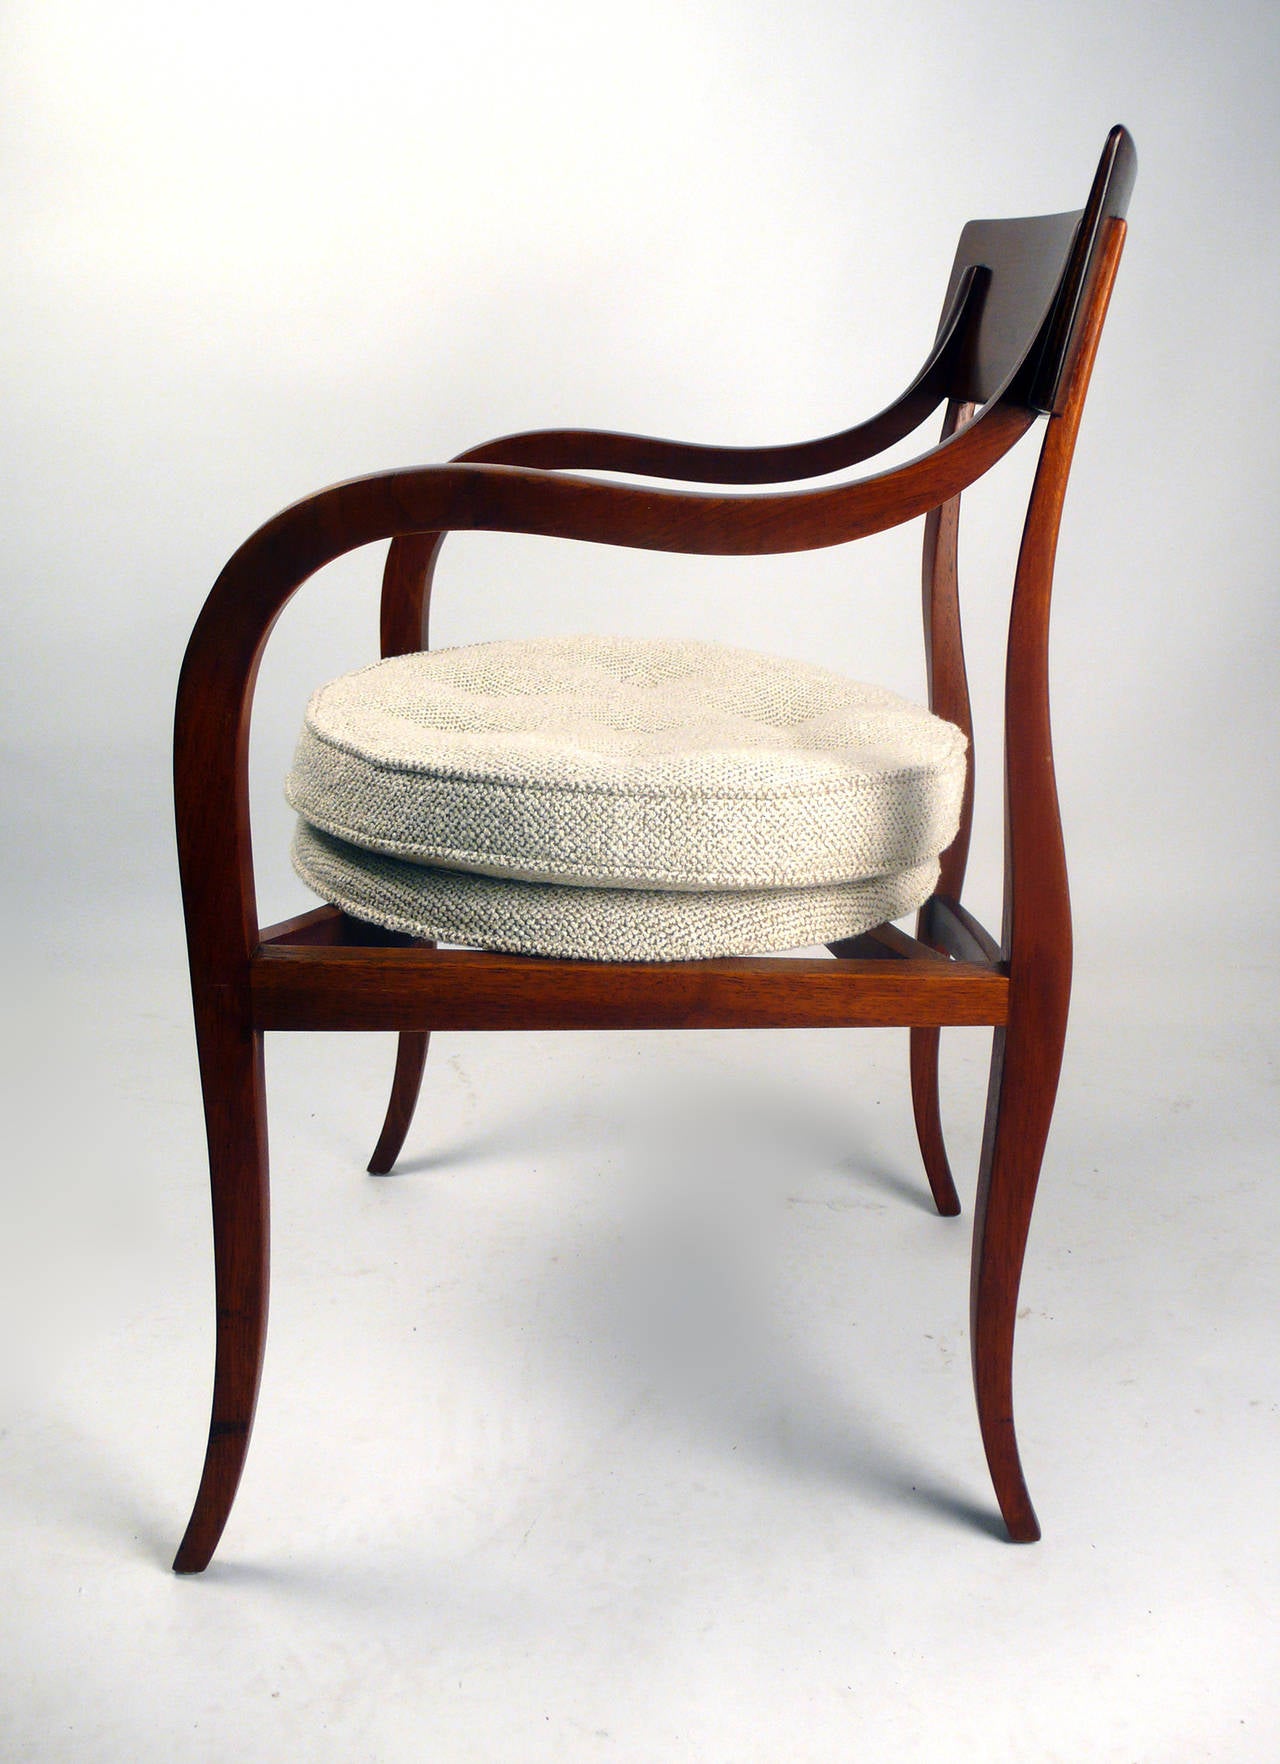 Dunbar Alexandria chair model 6004 designed designed by Edward Wormley. One of the most sculptural and sought after chairs ever created by Wormley.